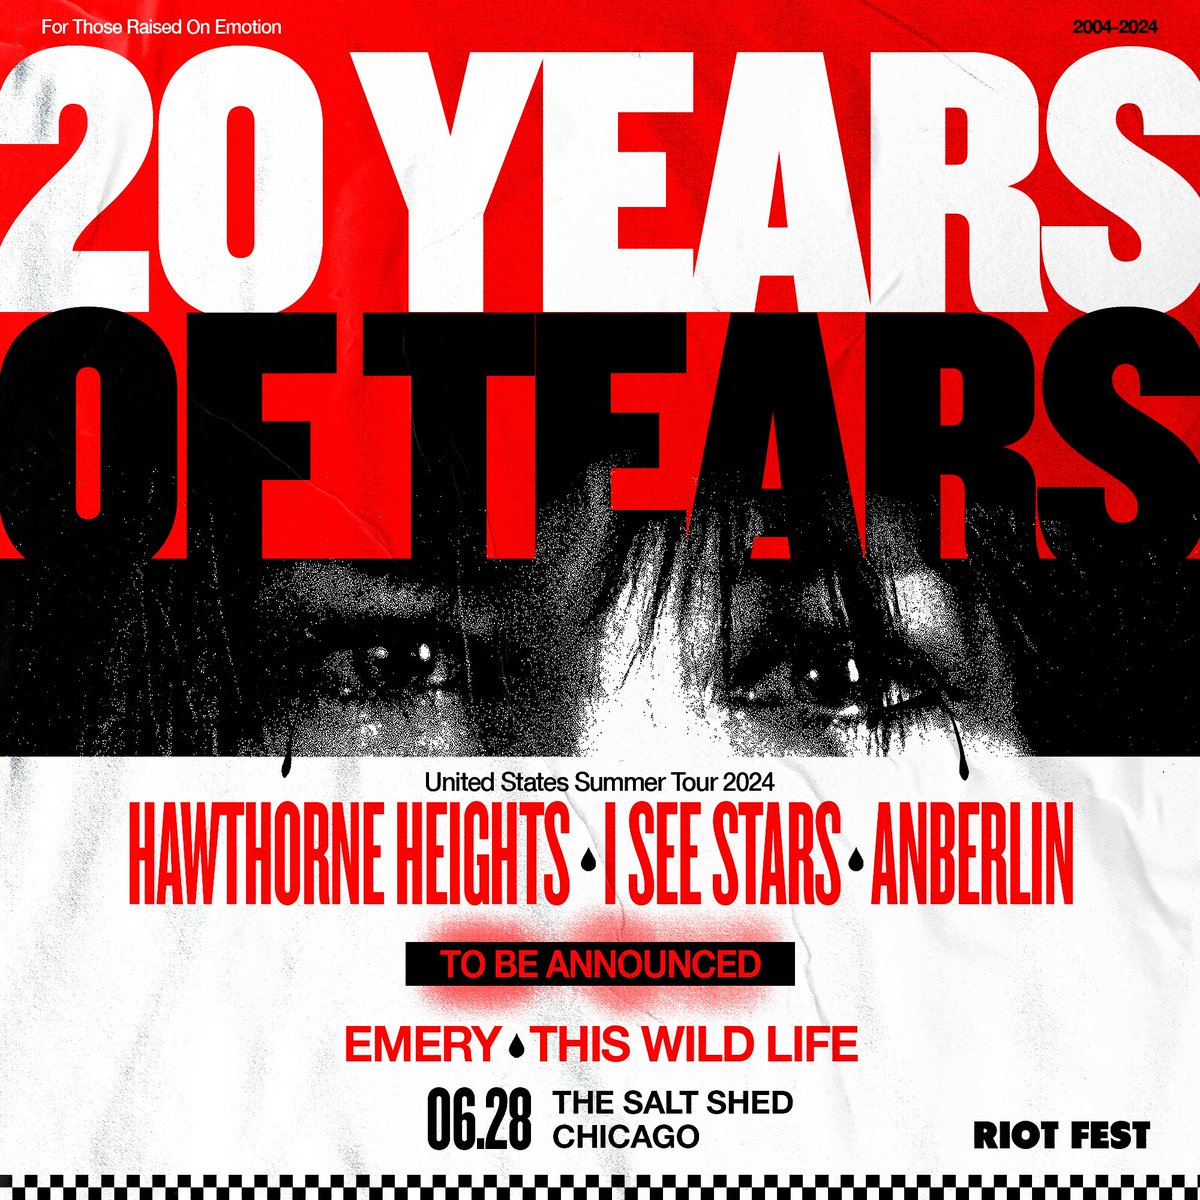 JUST ANNOUNCED 20 Years of Tears and @HawthorneHgts with special guests! Tickets go on sale April 19 @ 10am CT!